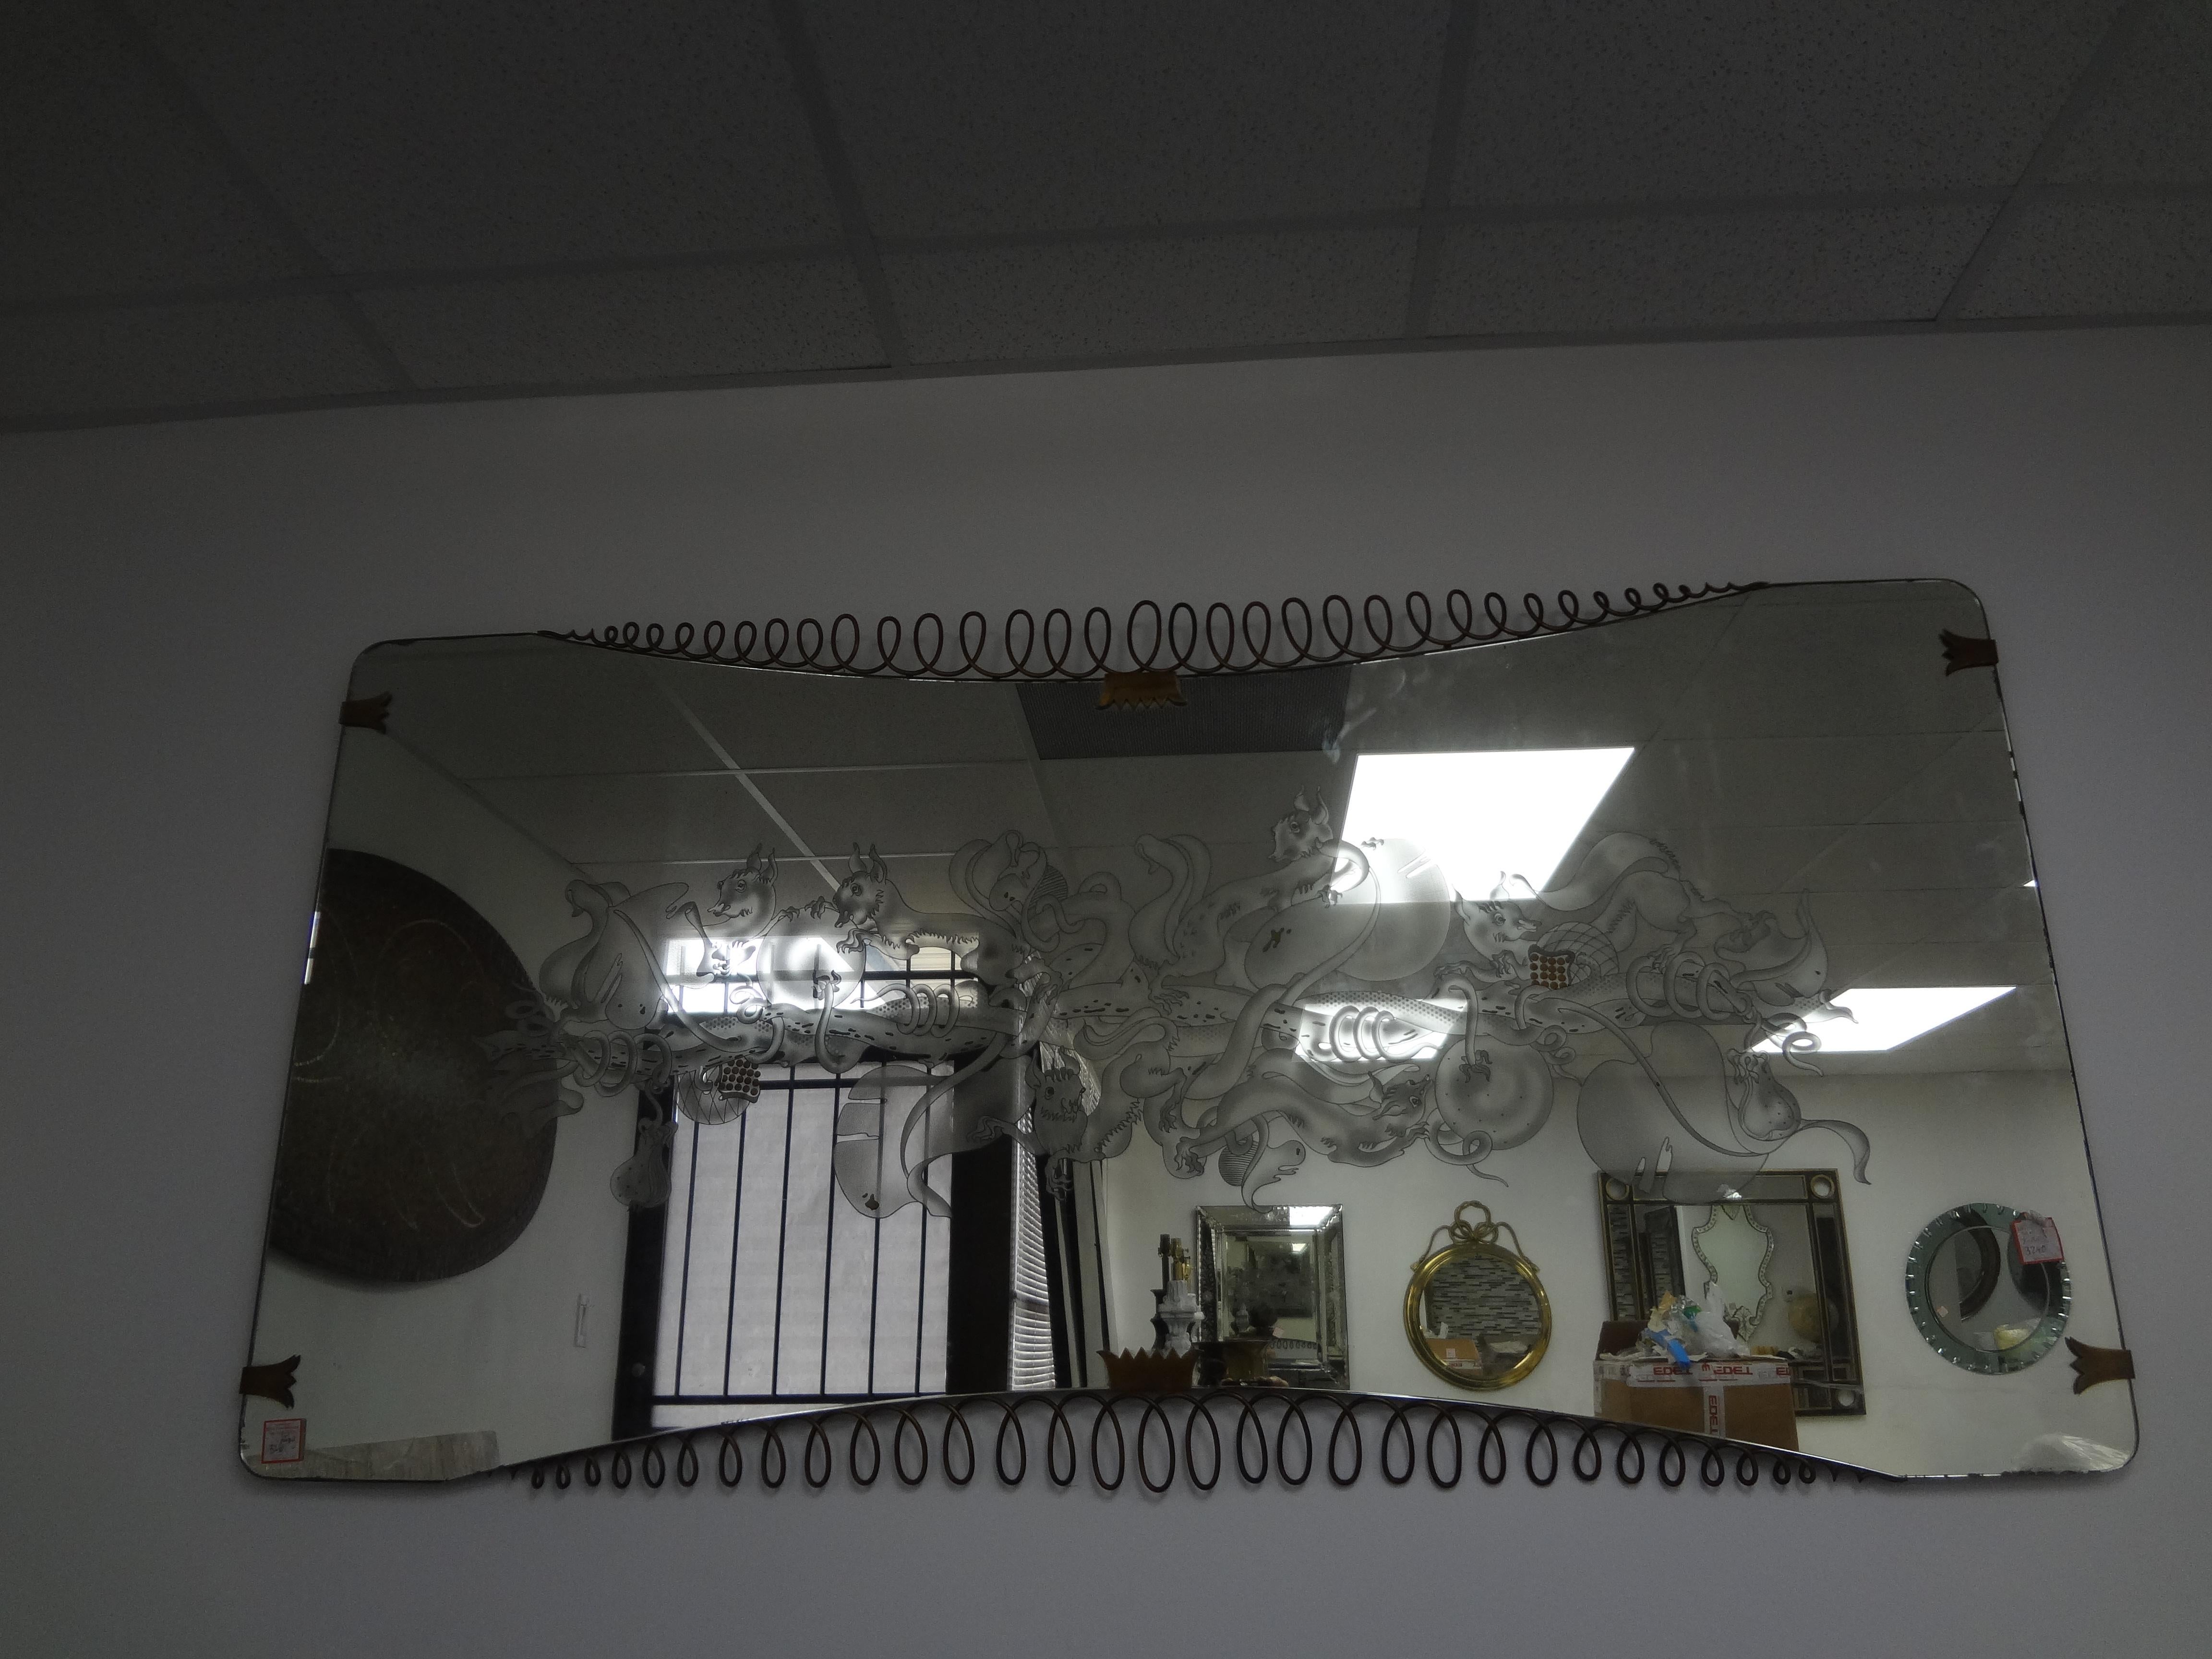 Italian Etched Mirror With Brass Accents Att. To Max Ingrand For Fontana Arte.
This magnificent large Italian mid century modern horizontal mirror has a beautiful etched dragon design trimmed with brass accents.
A  rare and unusual statement mirror!
